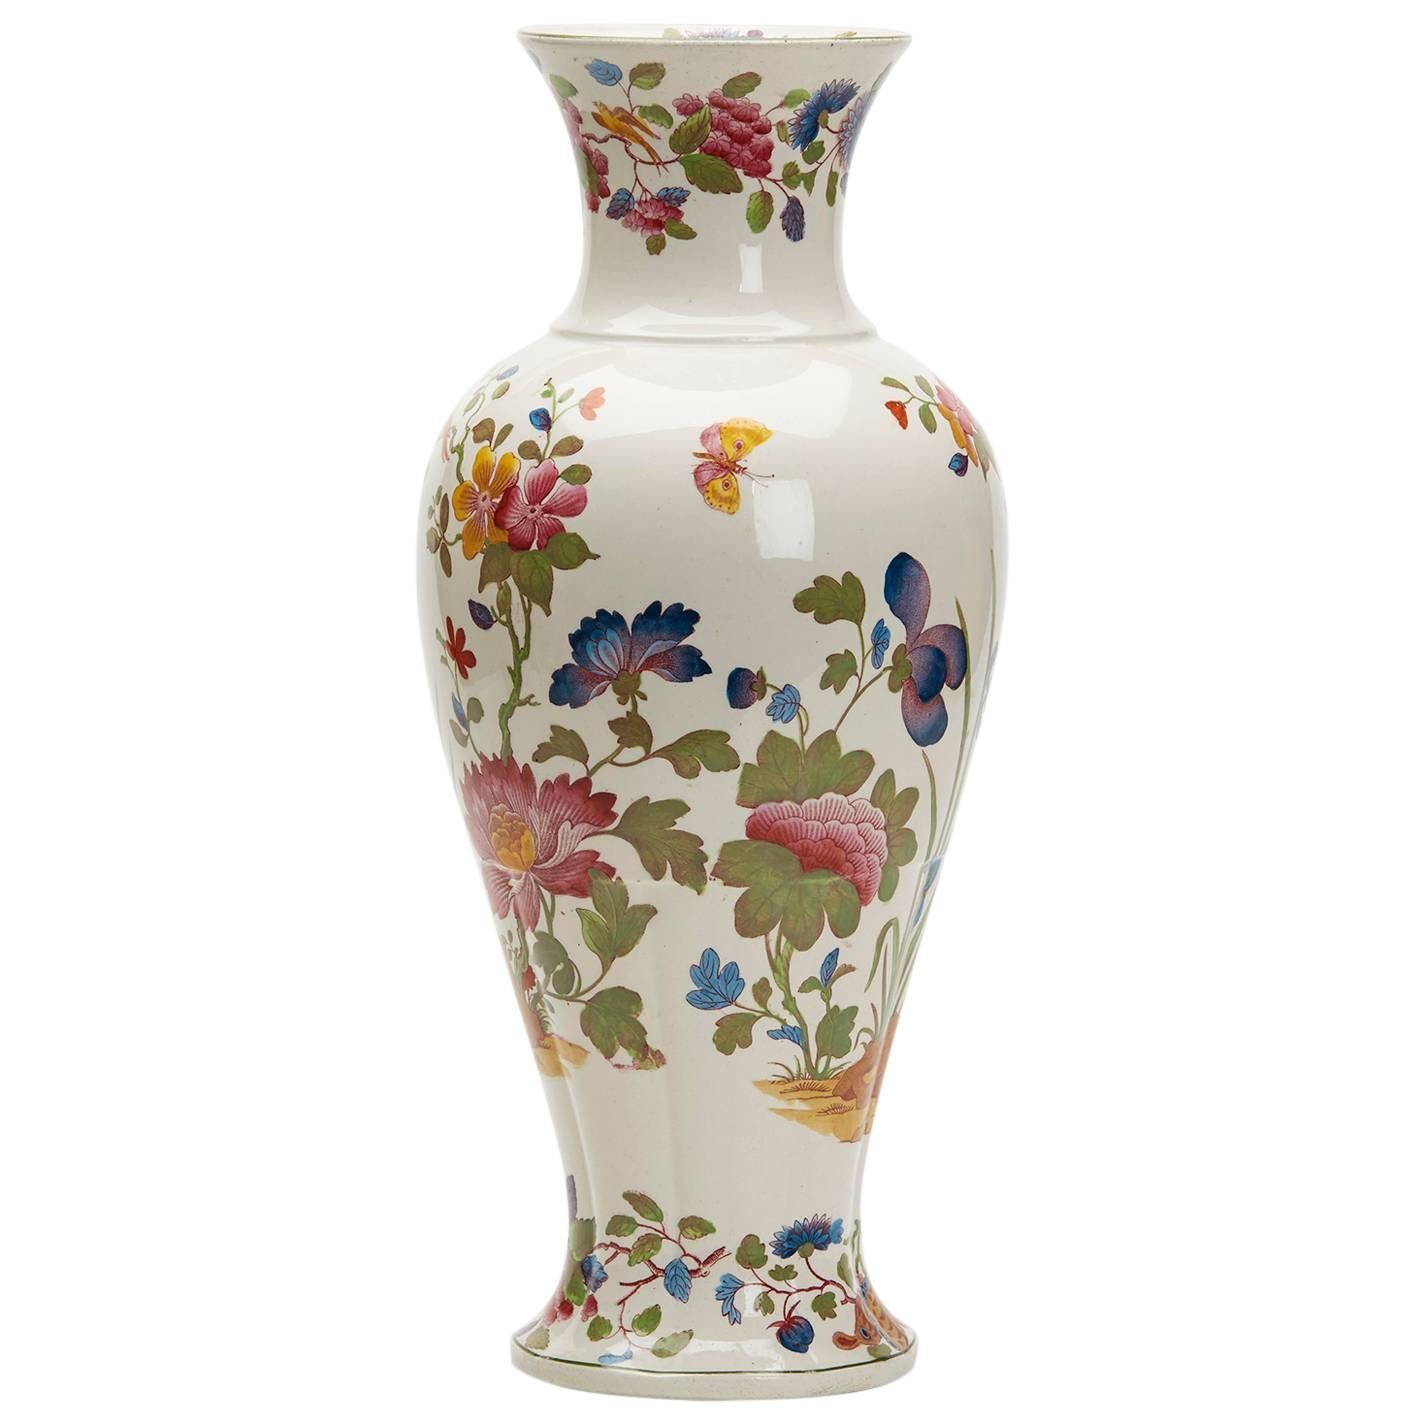 Large Antique Wedgwood Floral Decorated Vase, Dated 1911